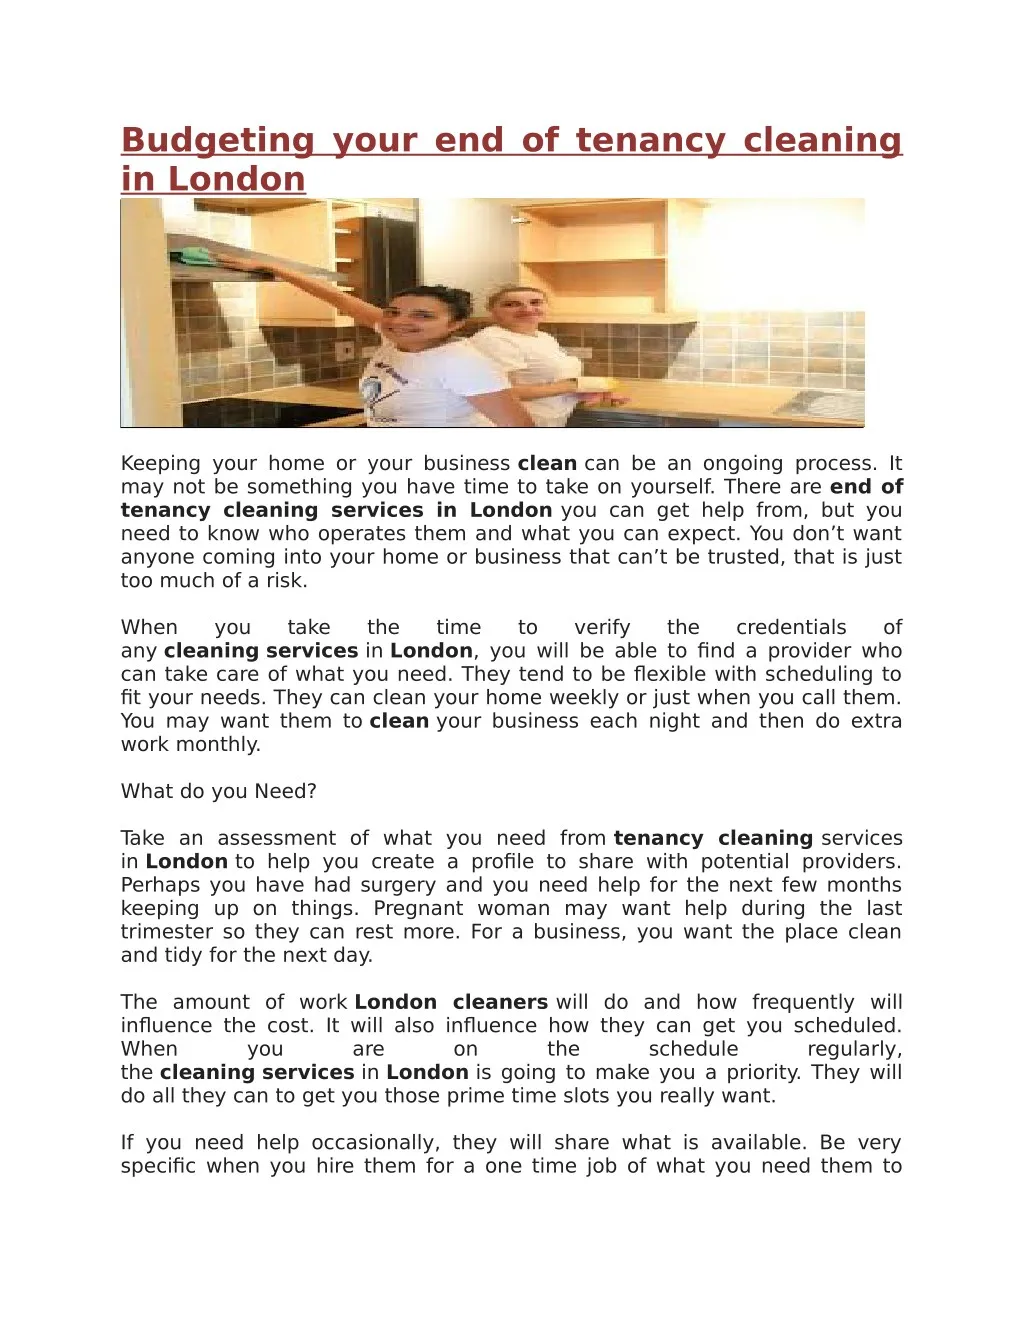 budgeting your end of tenancy cleaning in london